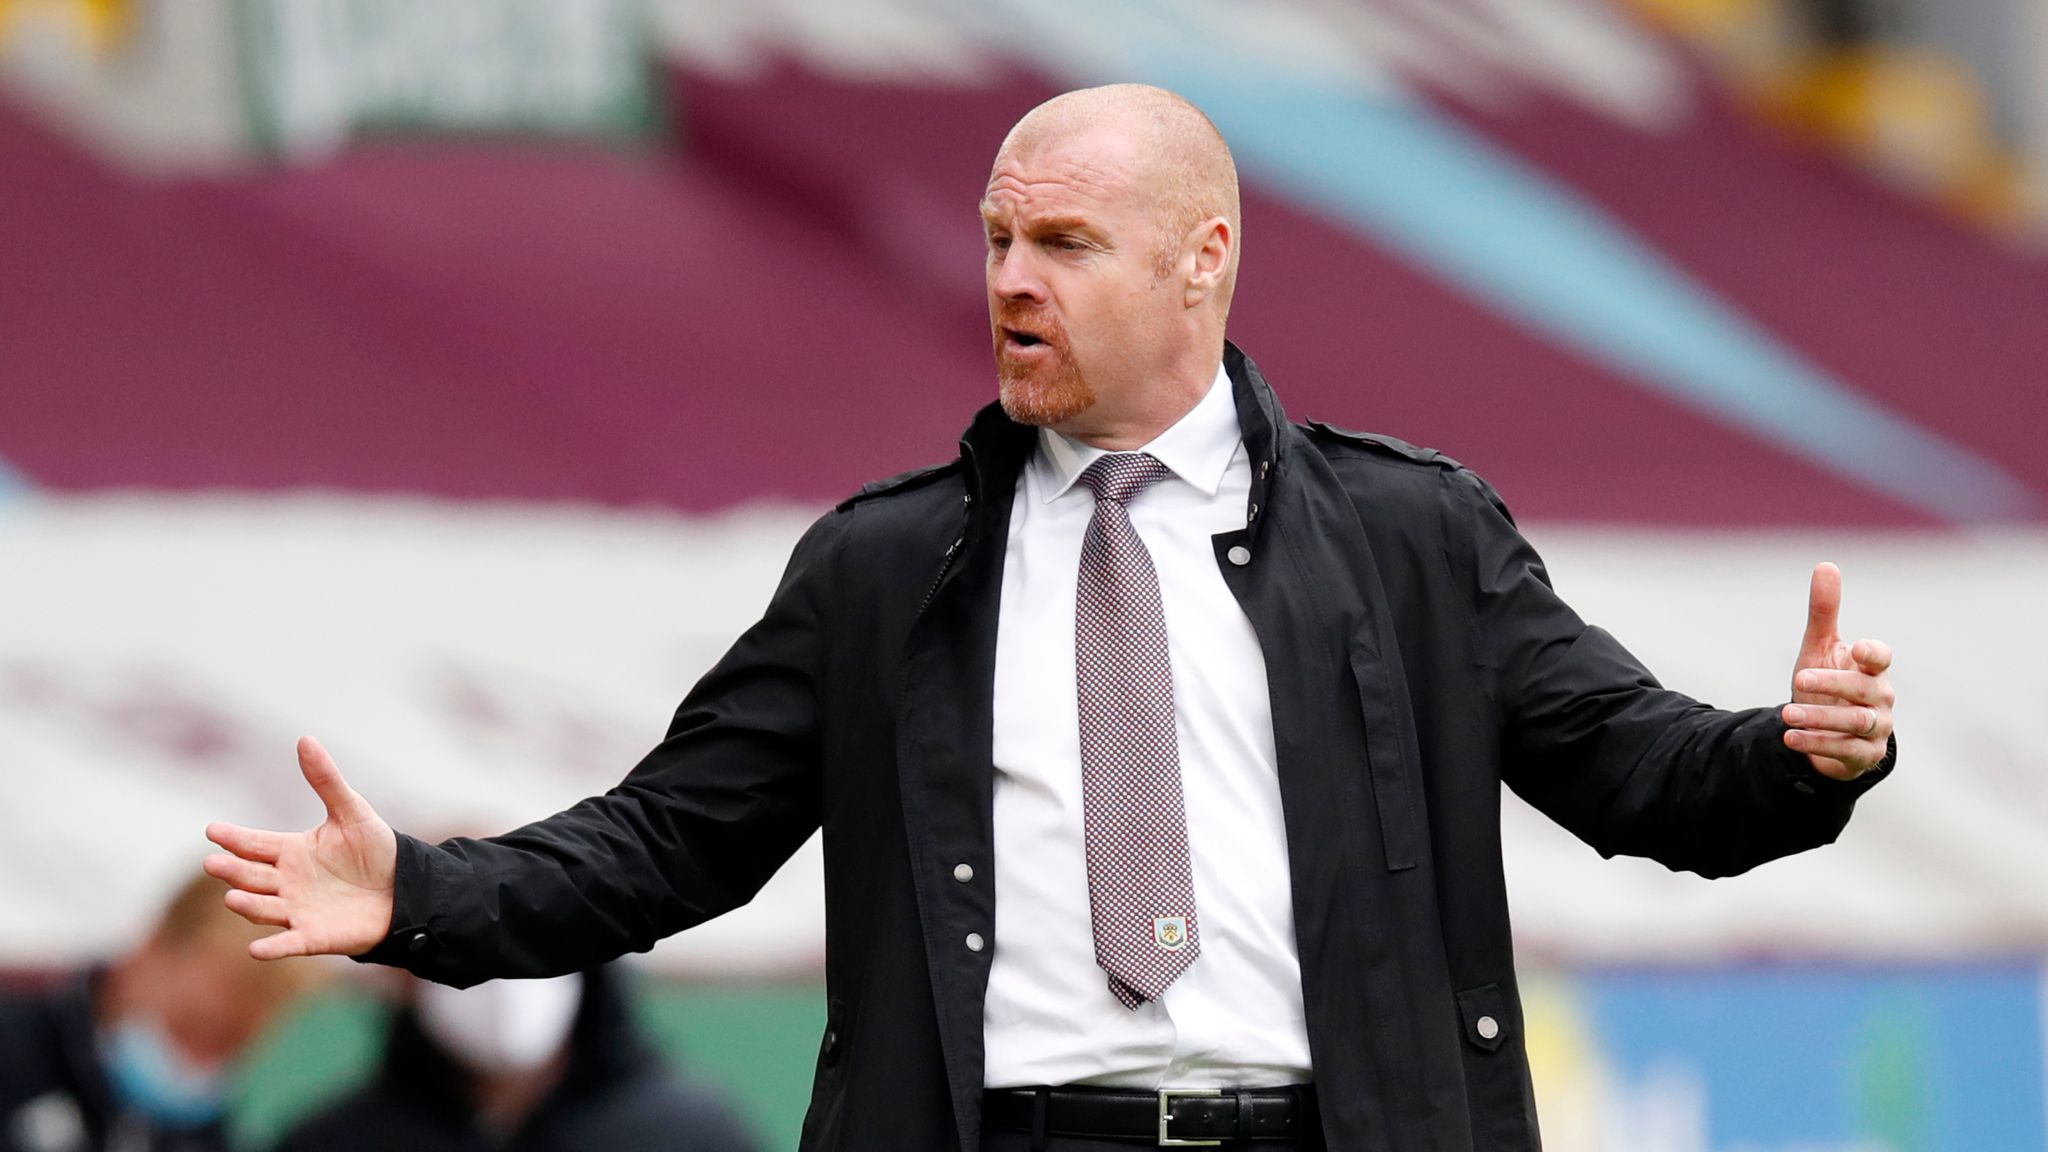 Burnley boss Sean Dyche says five-sub rule change favours big clubs | Football News | Sky Sports